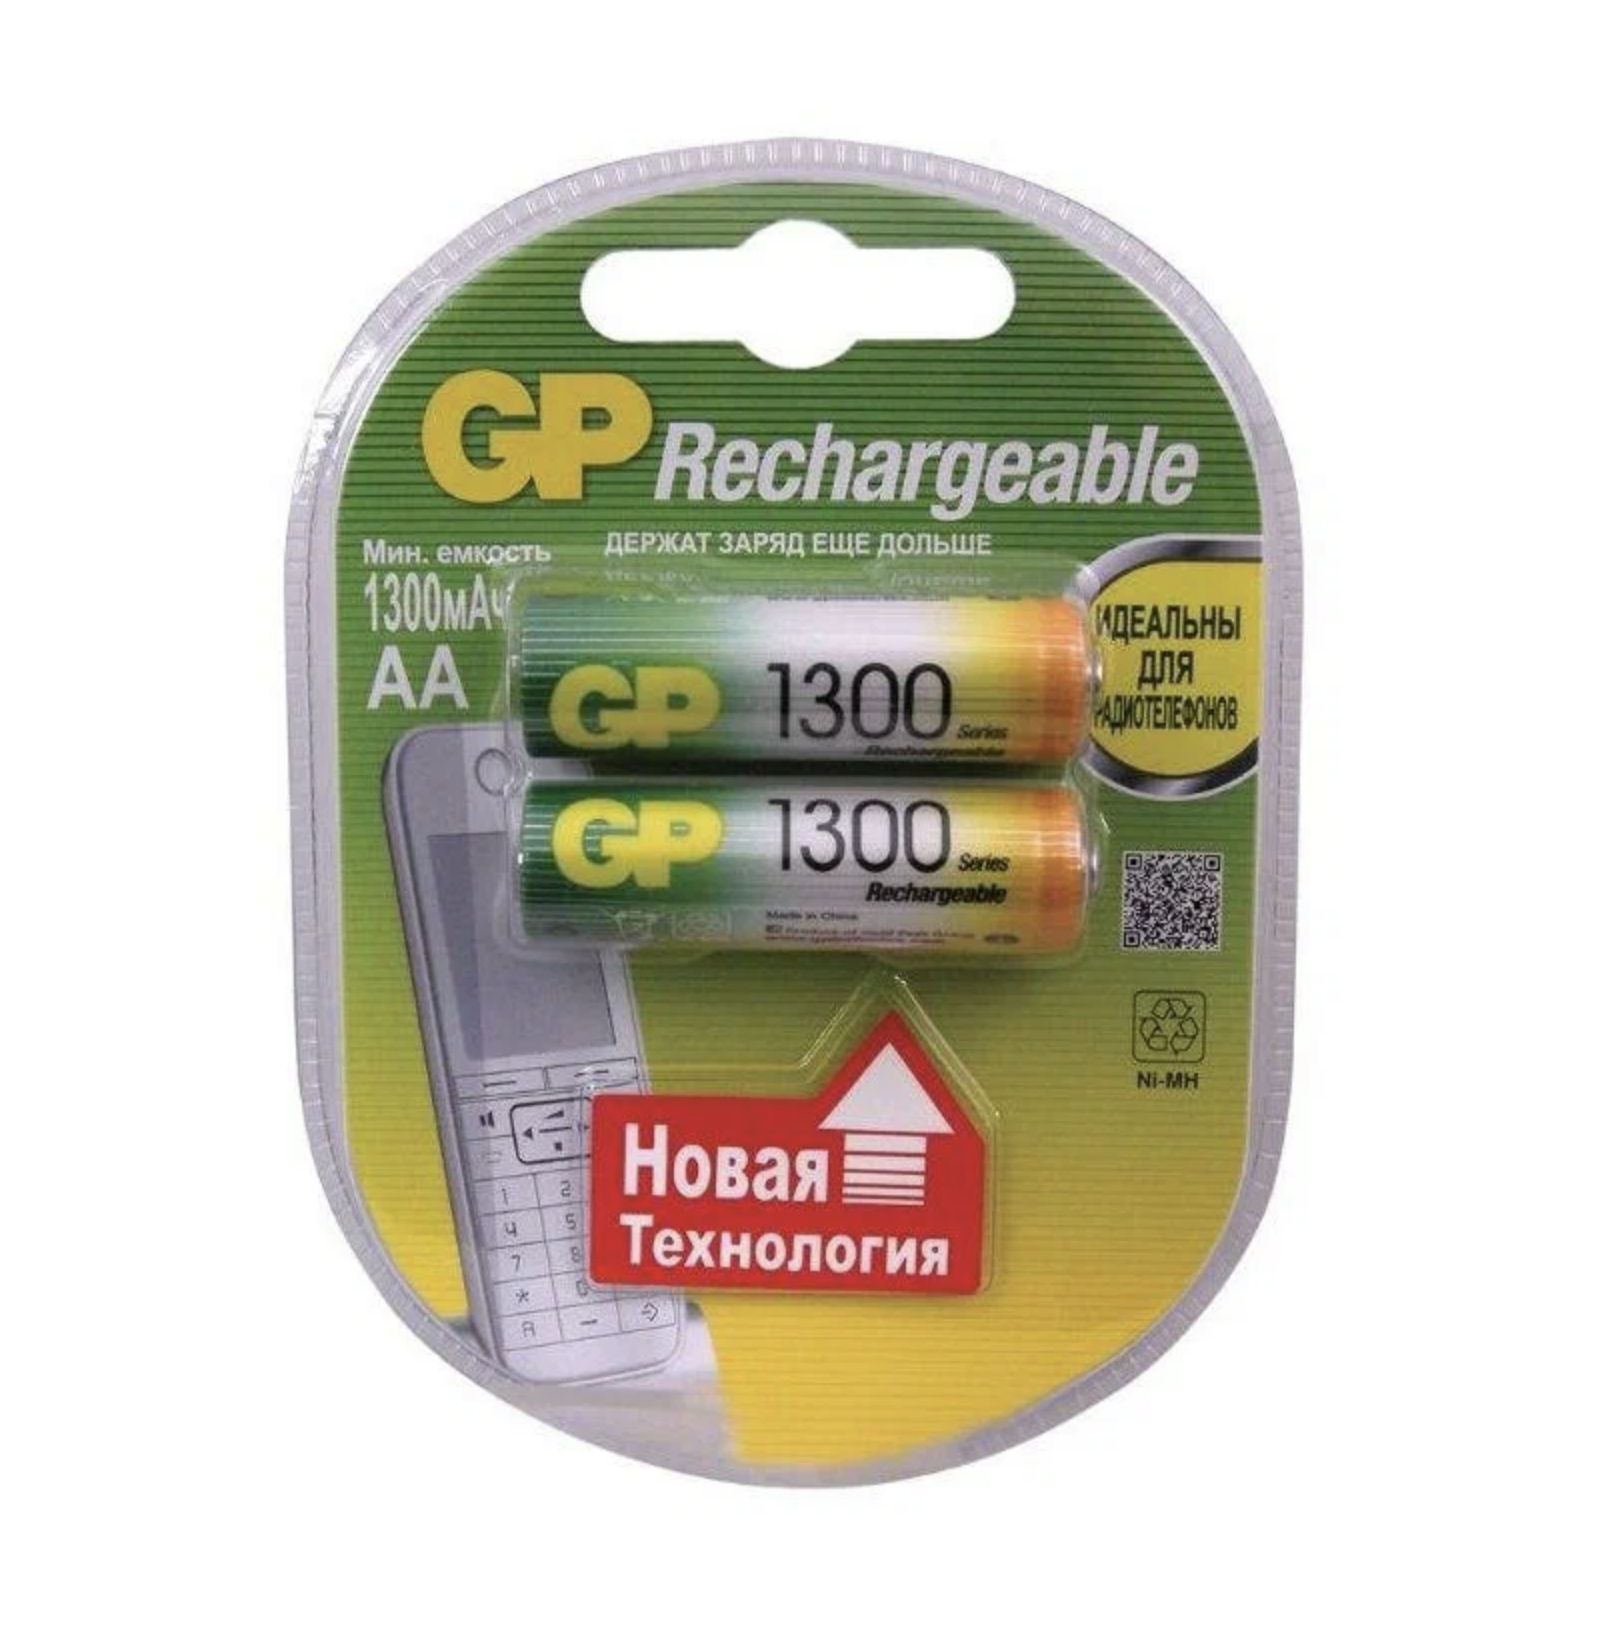  GP -  Rechargeable AA 1300 / 130AAHC 2 